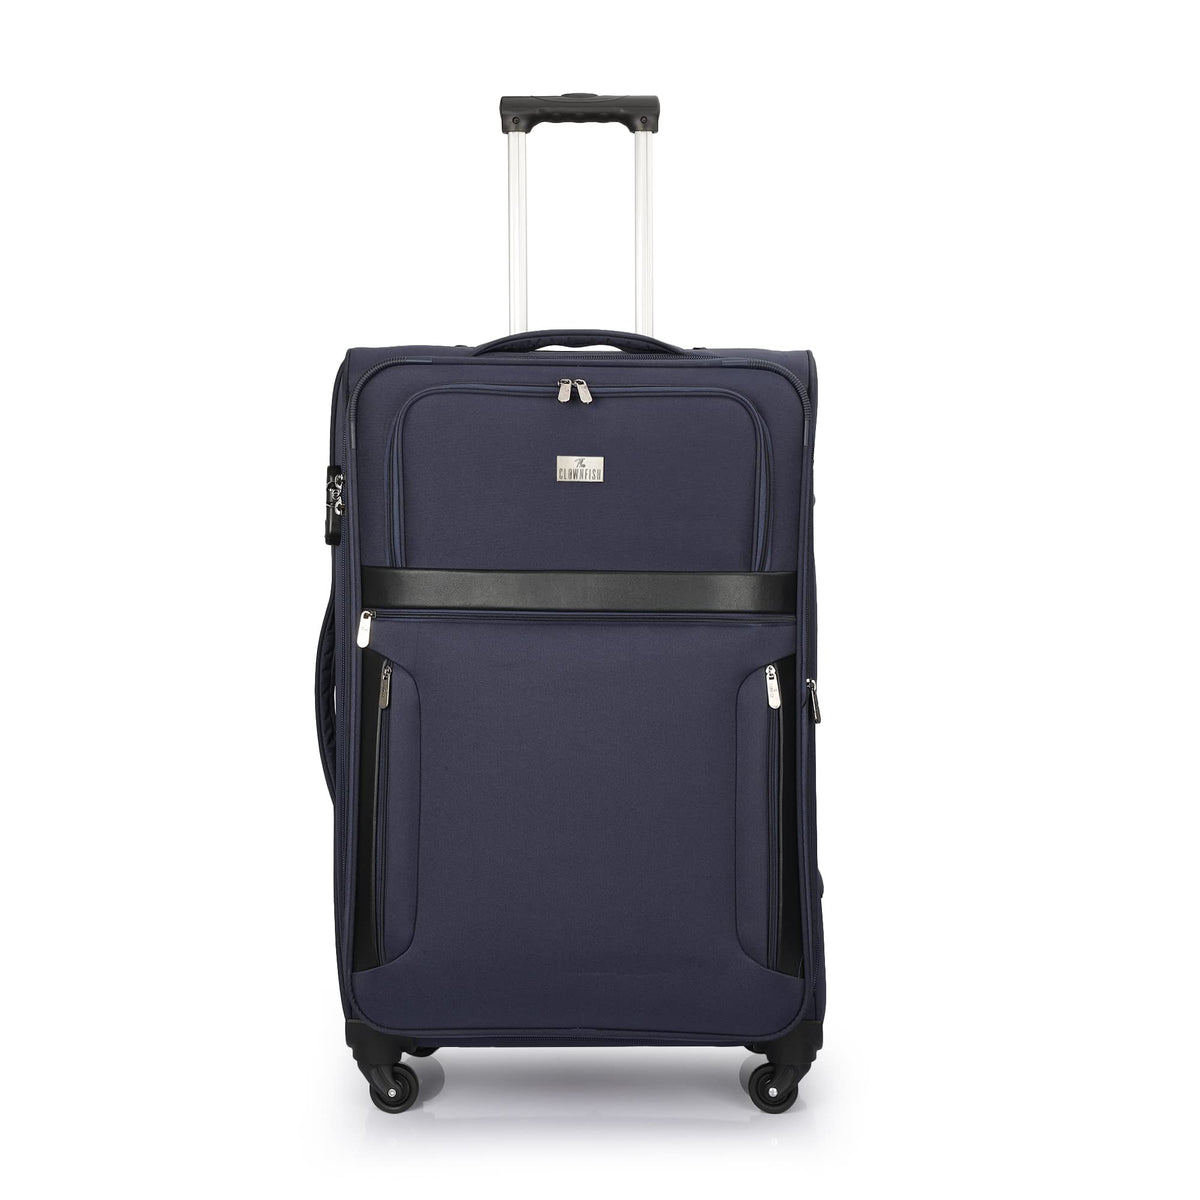 The Clownfish Faramund Series Luggage Polyester Softsided Suitcase Four Wheel Trolley Bag- Navy Blue (Small Size- 56 cm)